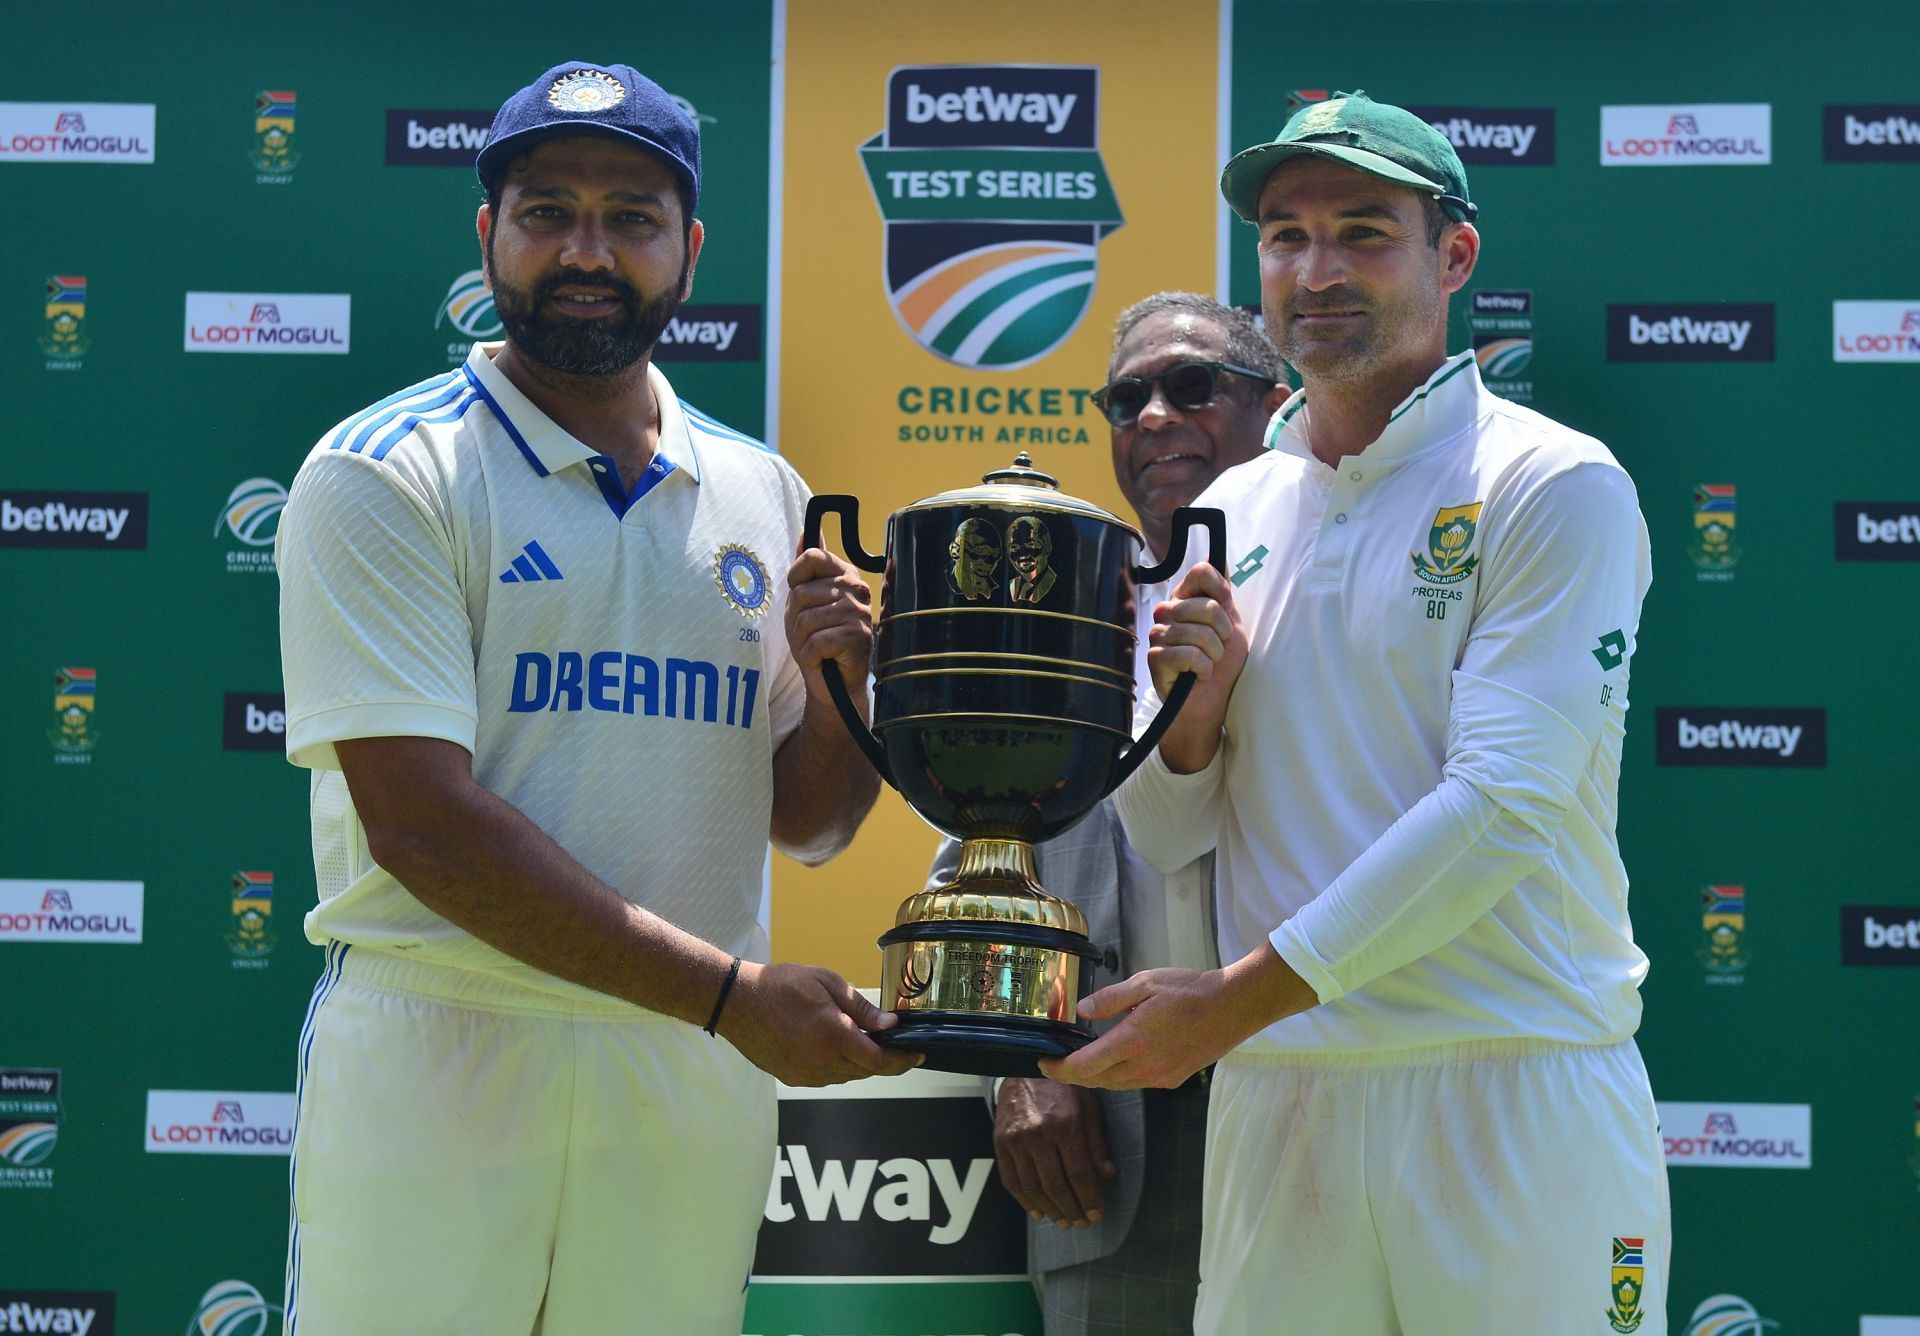 Rohit Sharma and Dean Elgar pose with the trophy after the South Africa vs India - 2nd Test